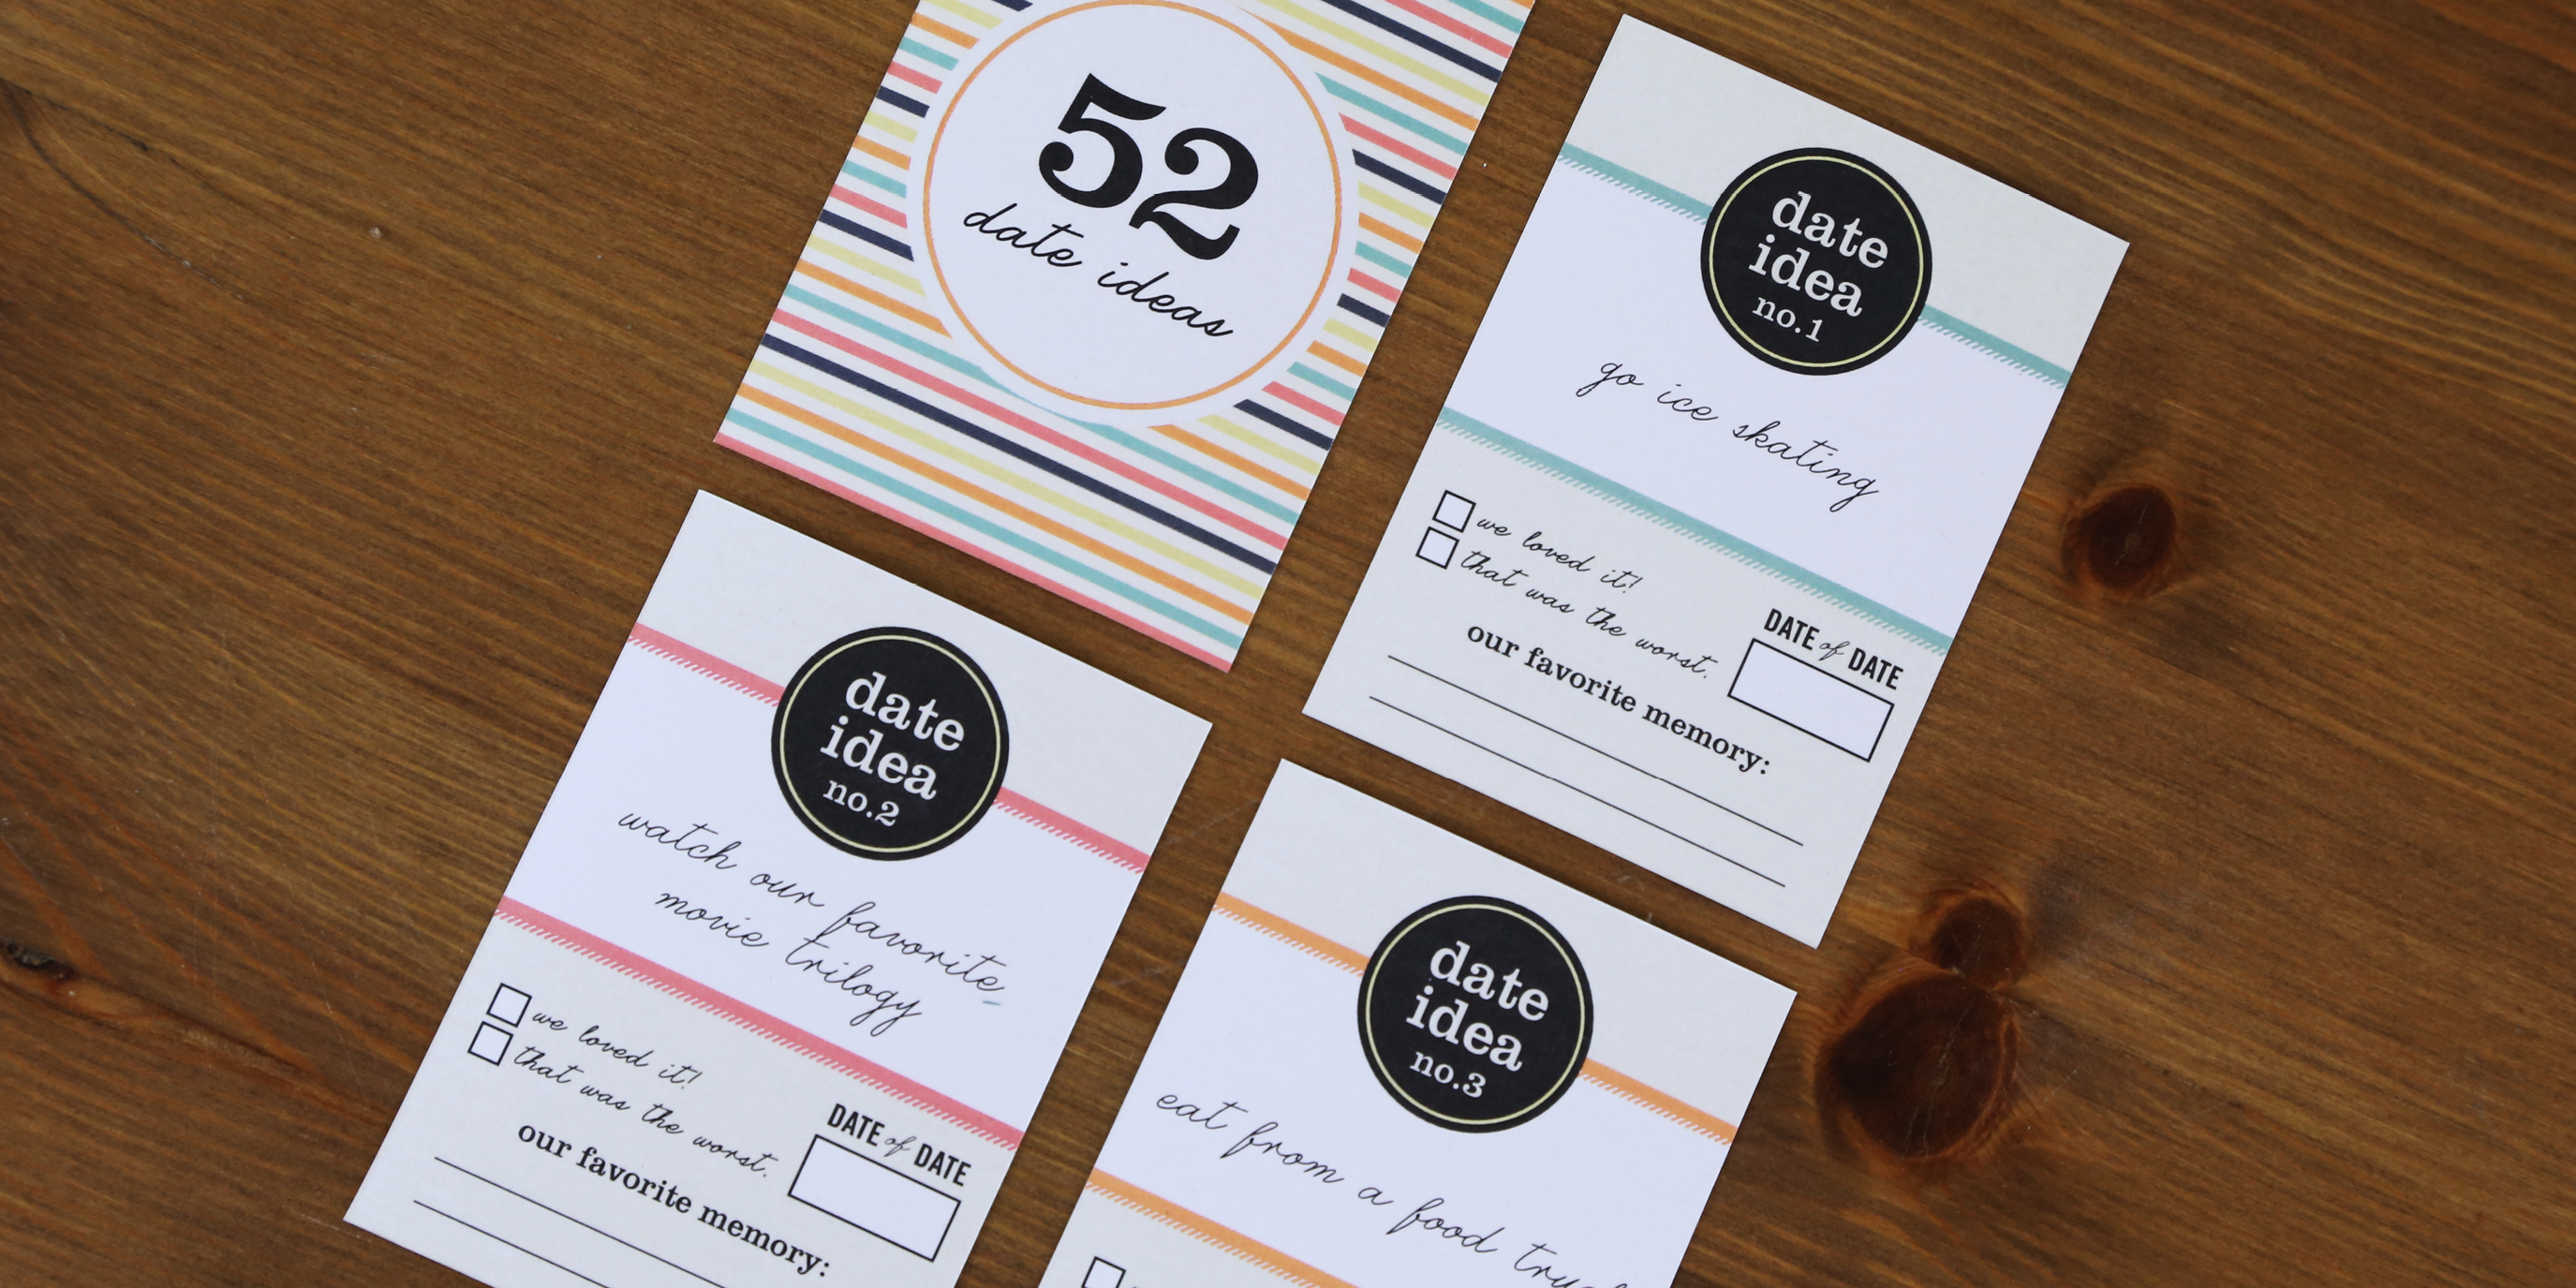 52-date-night-ideas-printable-cards-gift-box